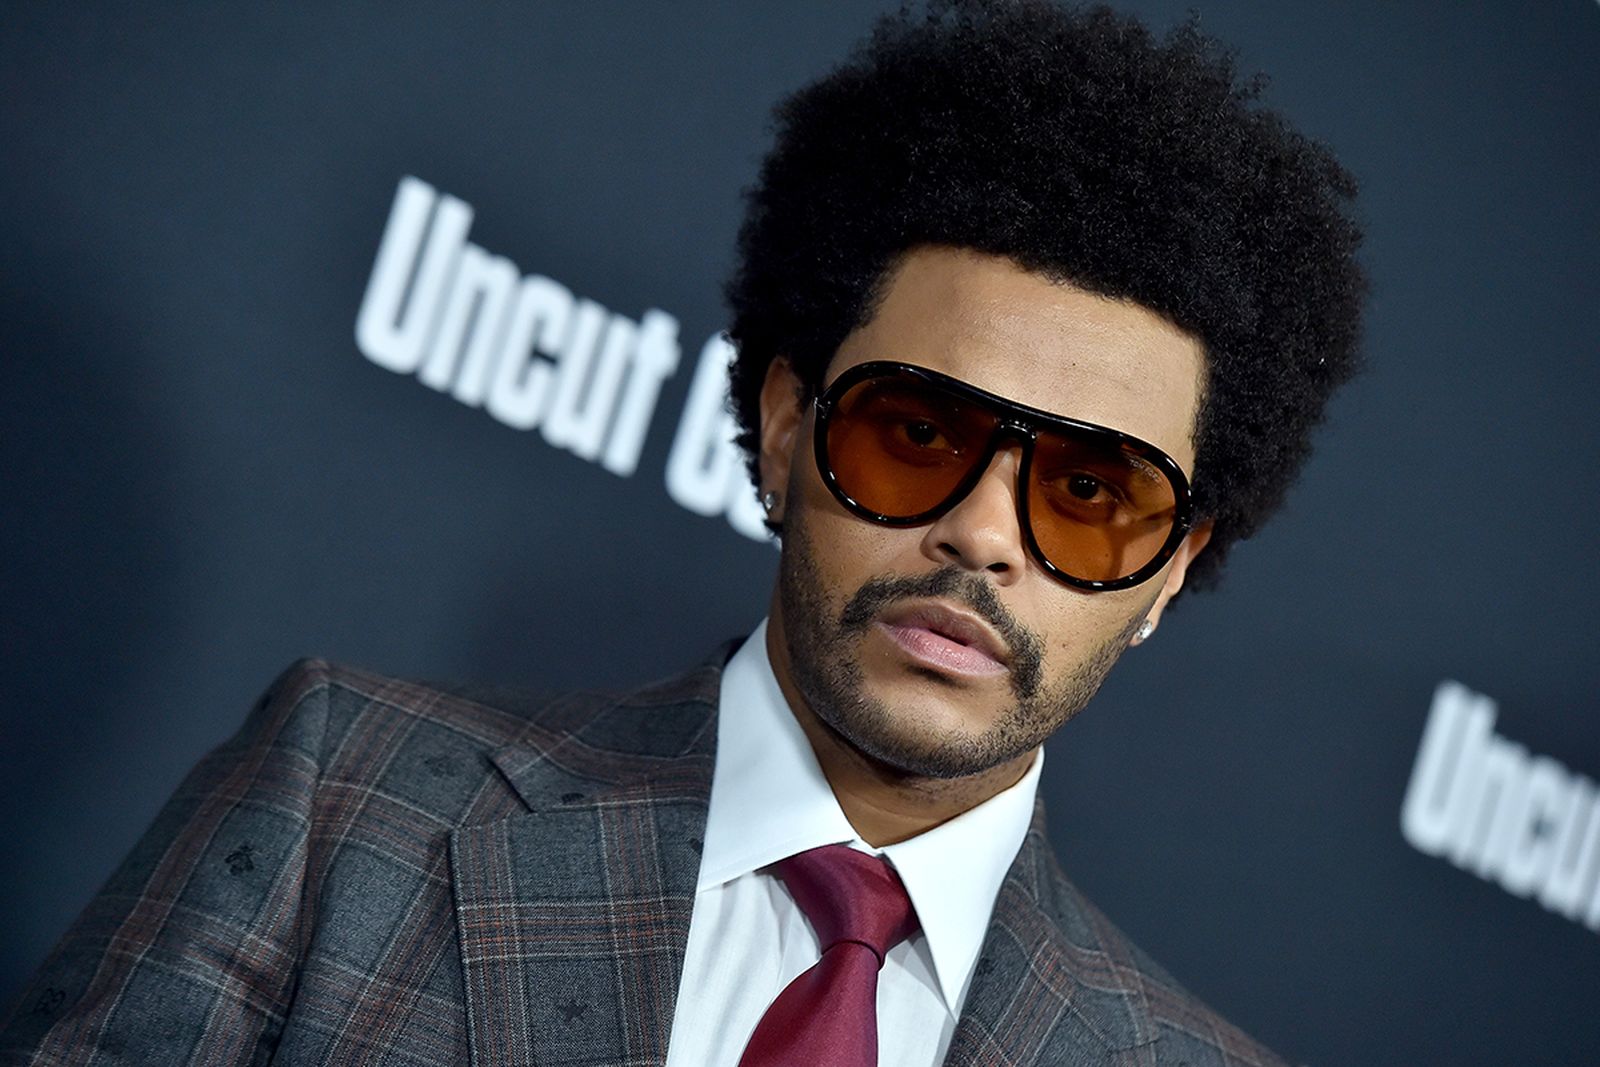 The Weeknd attends the premiere of A24's "Uncut Gems"